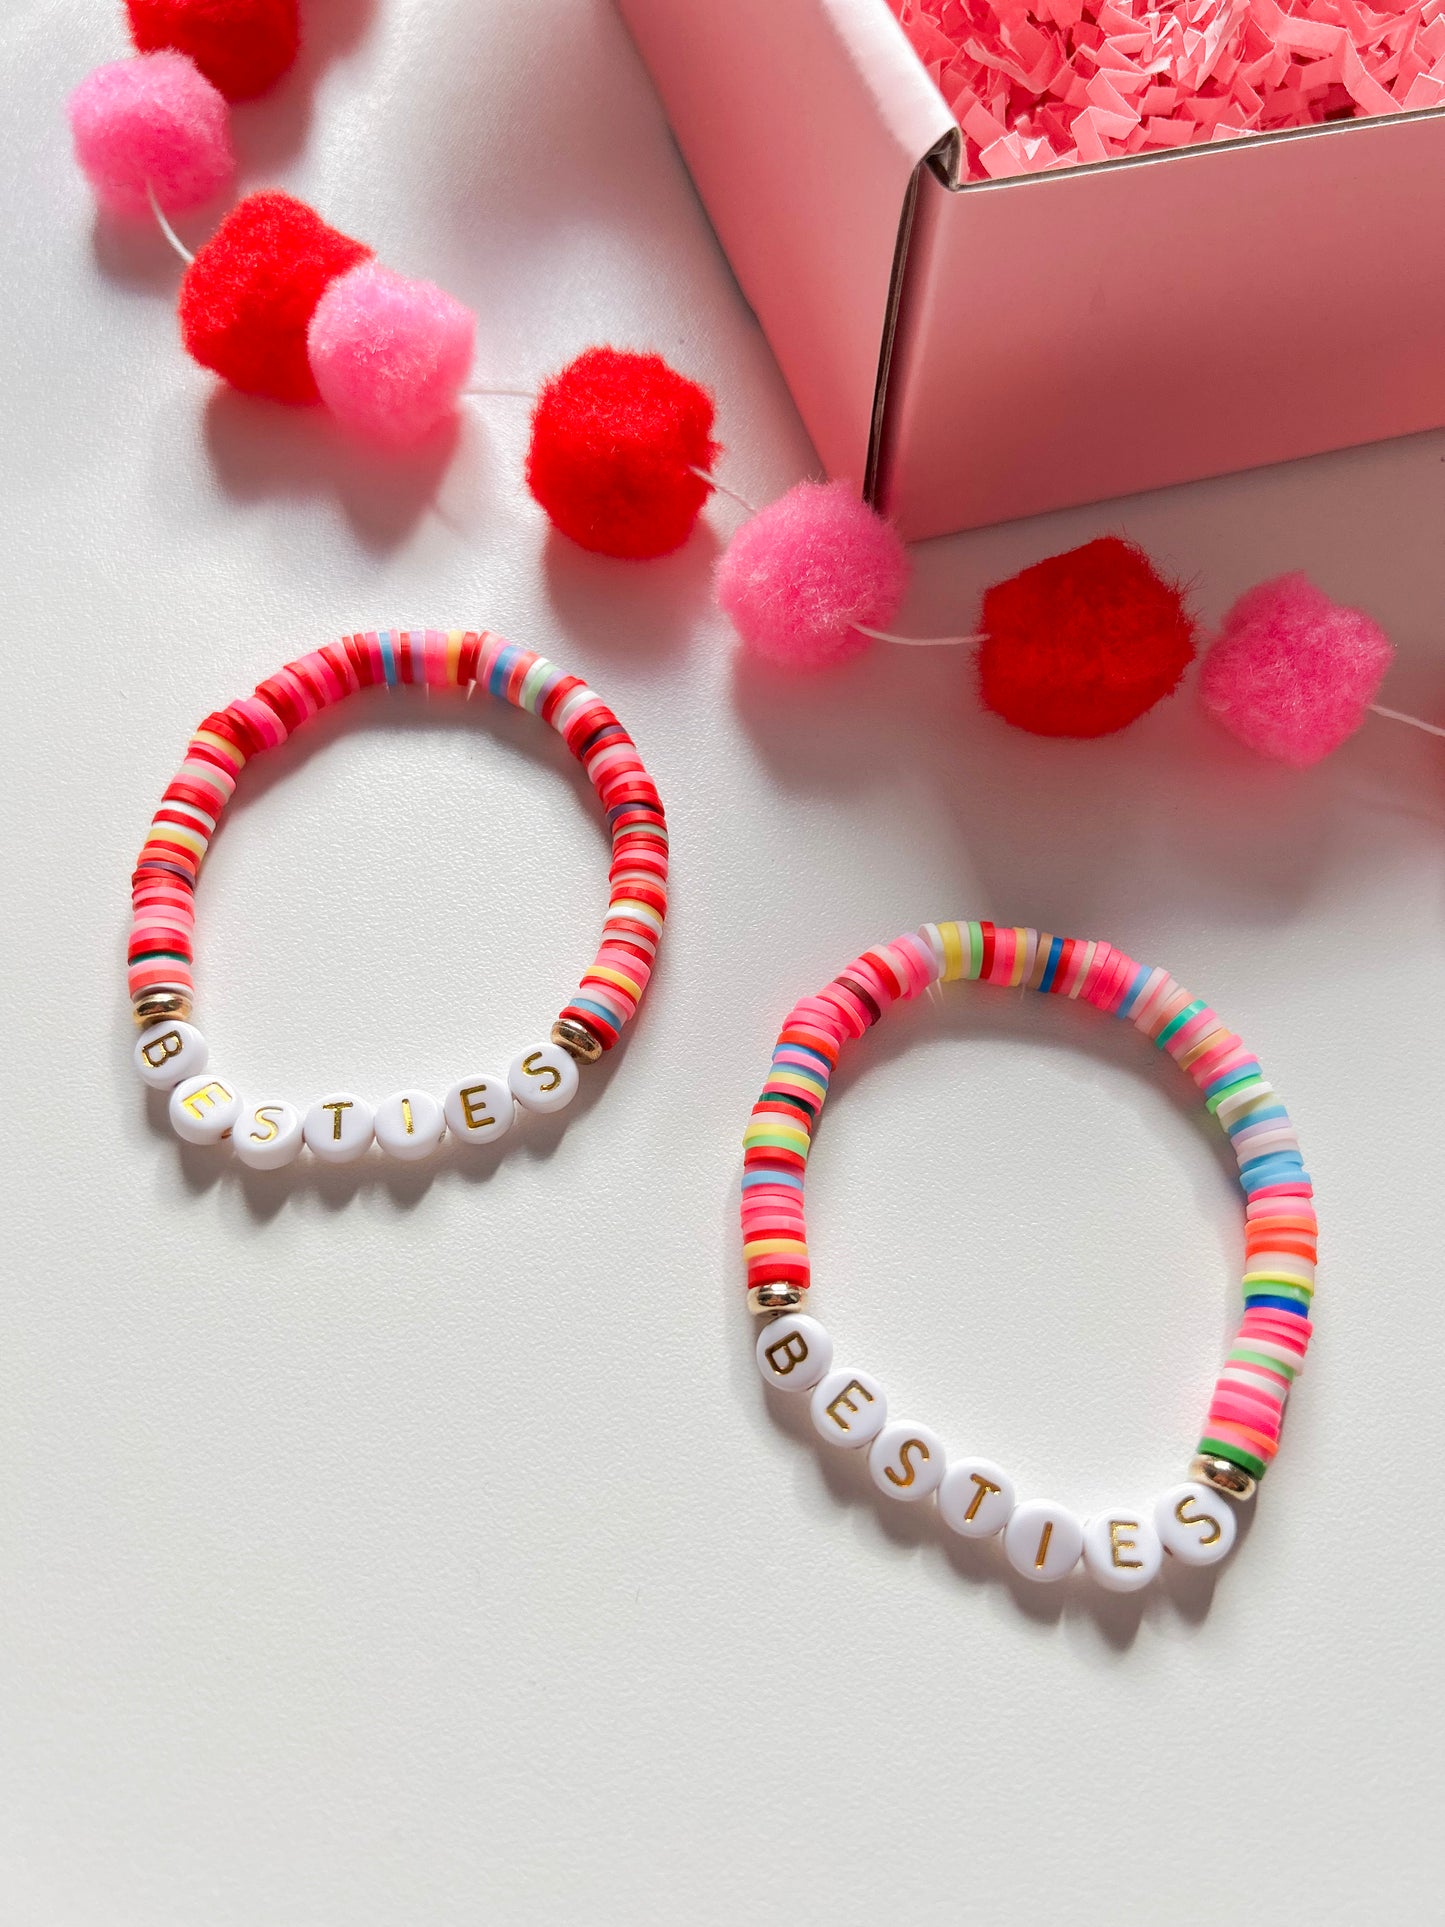 Besties Mommy and Me Bracelet set with Note, gifts for daughters from mothers